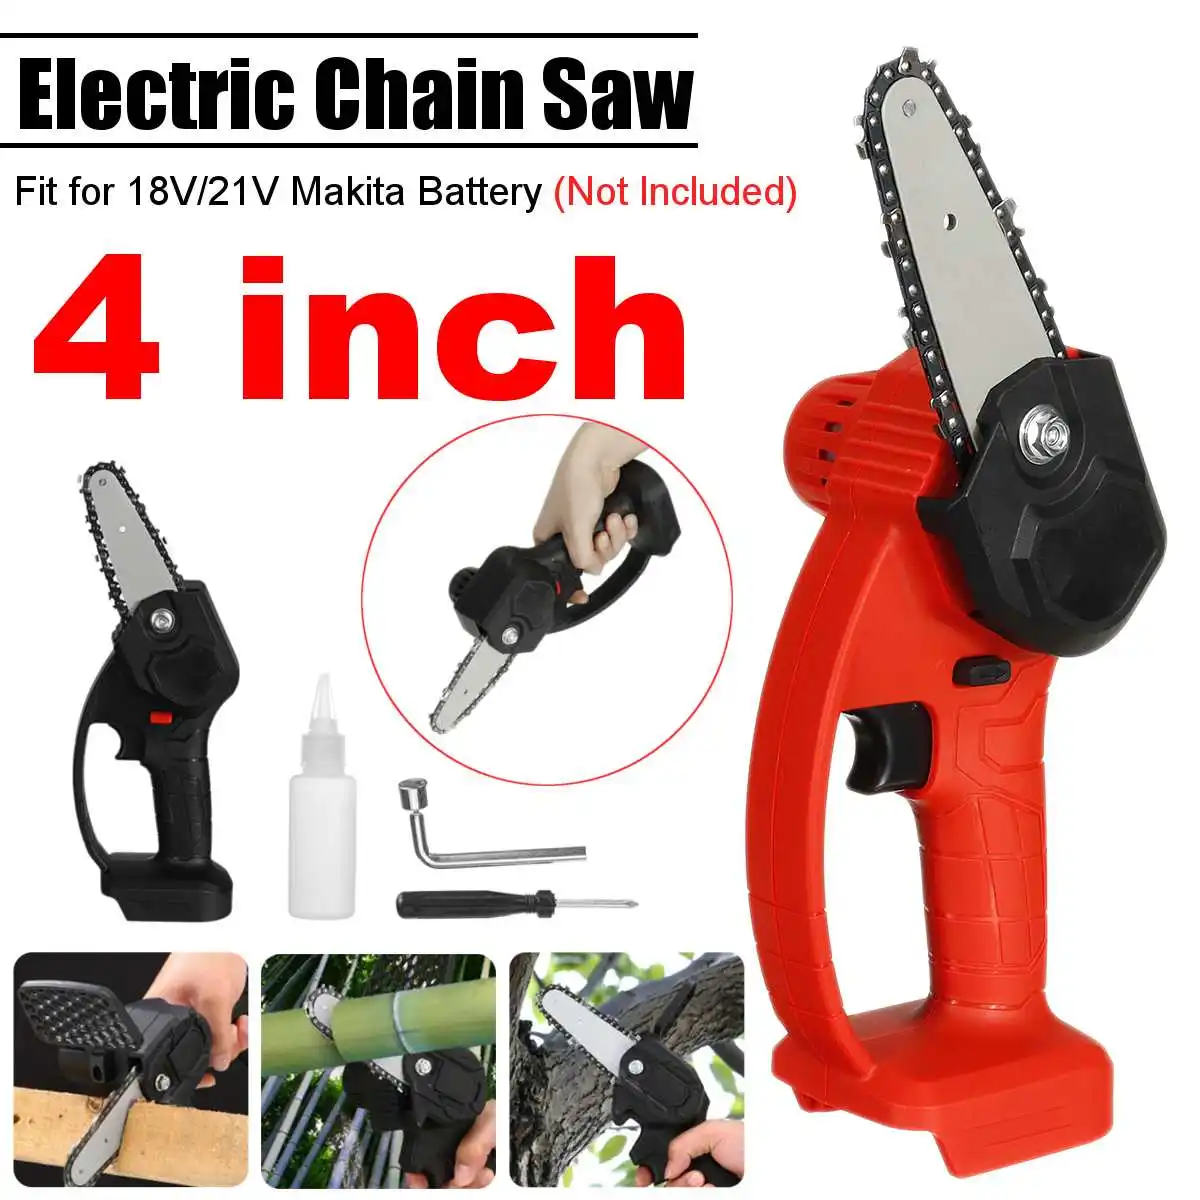 

550W Electric Chain Saw Lithium Battery Mini Pruning One-handed Garden Tool With Chain Saws for 18V/21V Makita Battery